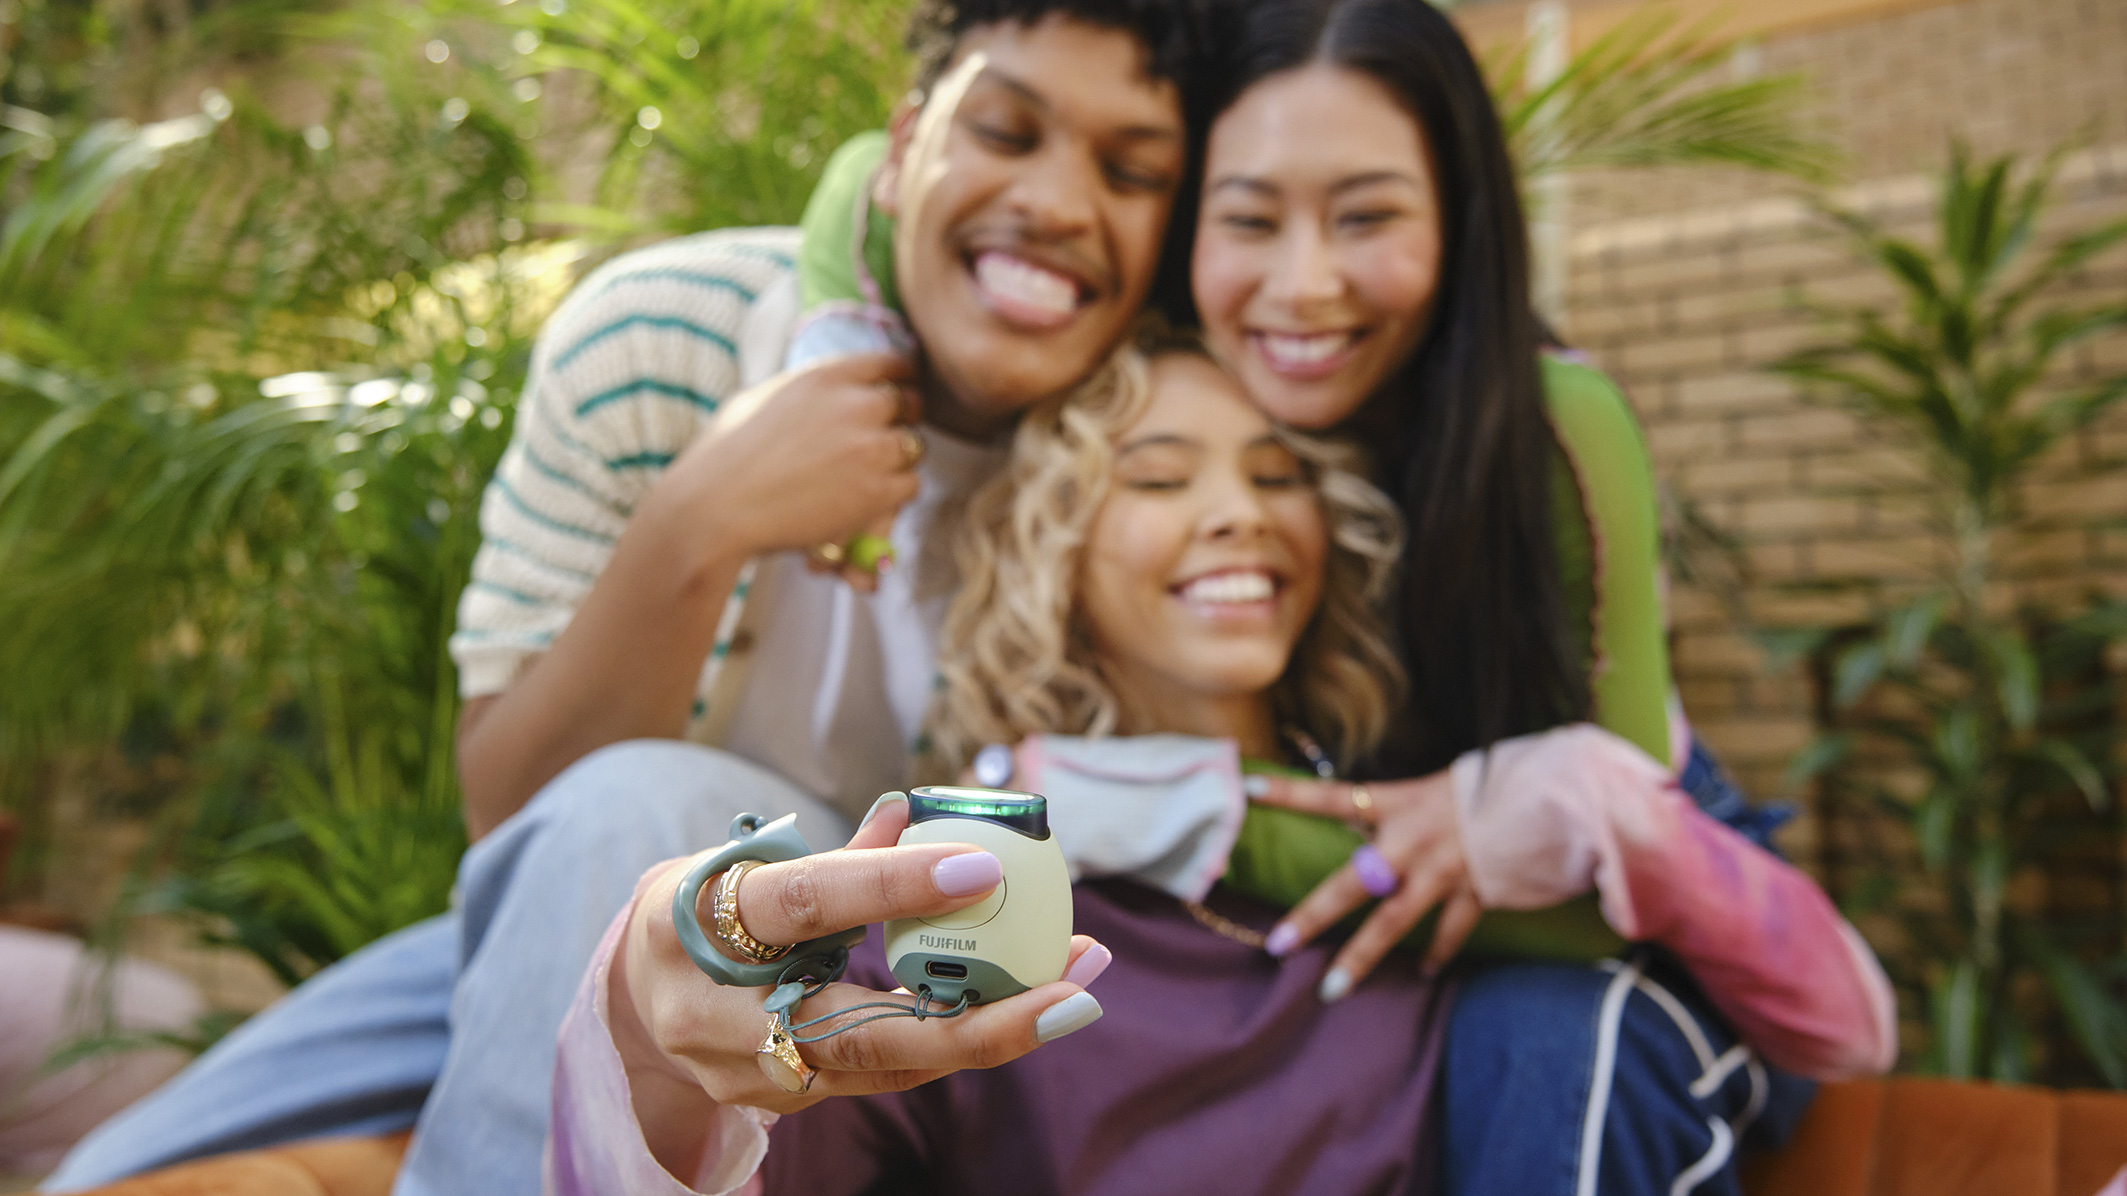 Three people posing for a selfie with the Fujifilm Instax Pal in the foreground